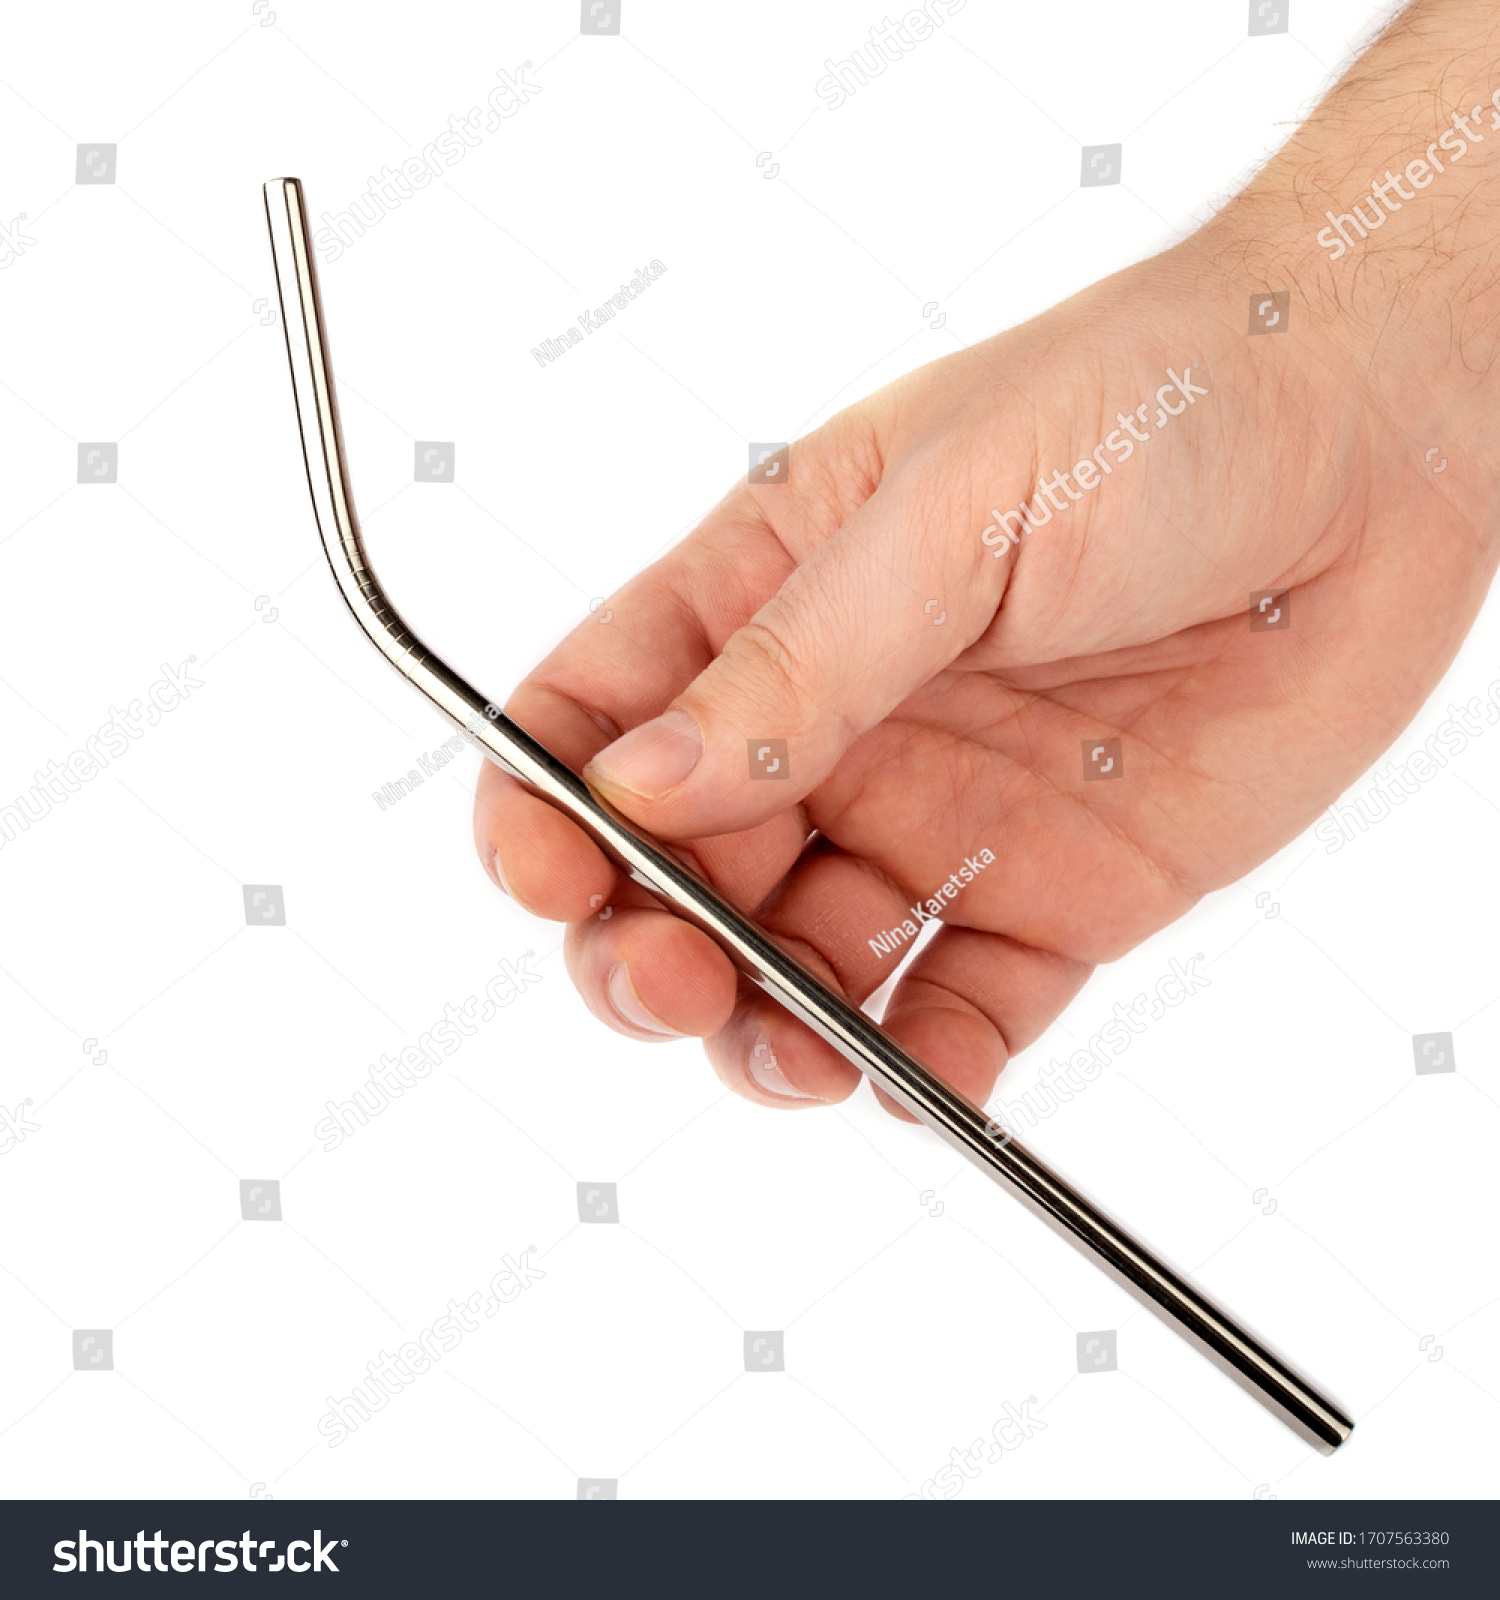 Stainless steel metal straw in hand on a white isolated background. Showing subject on a white background. #1707563380